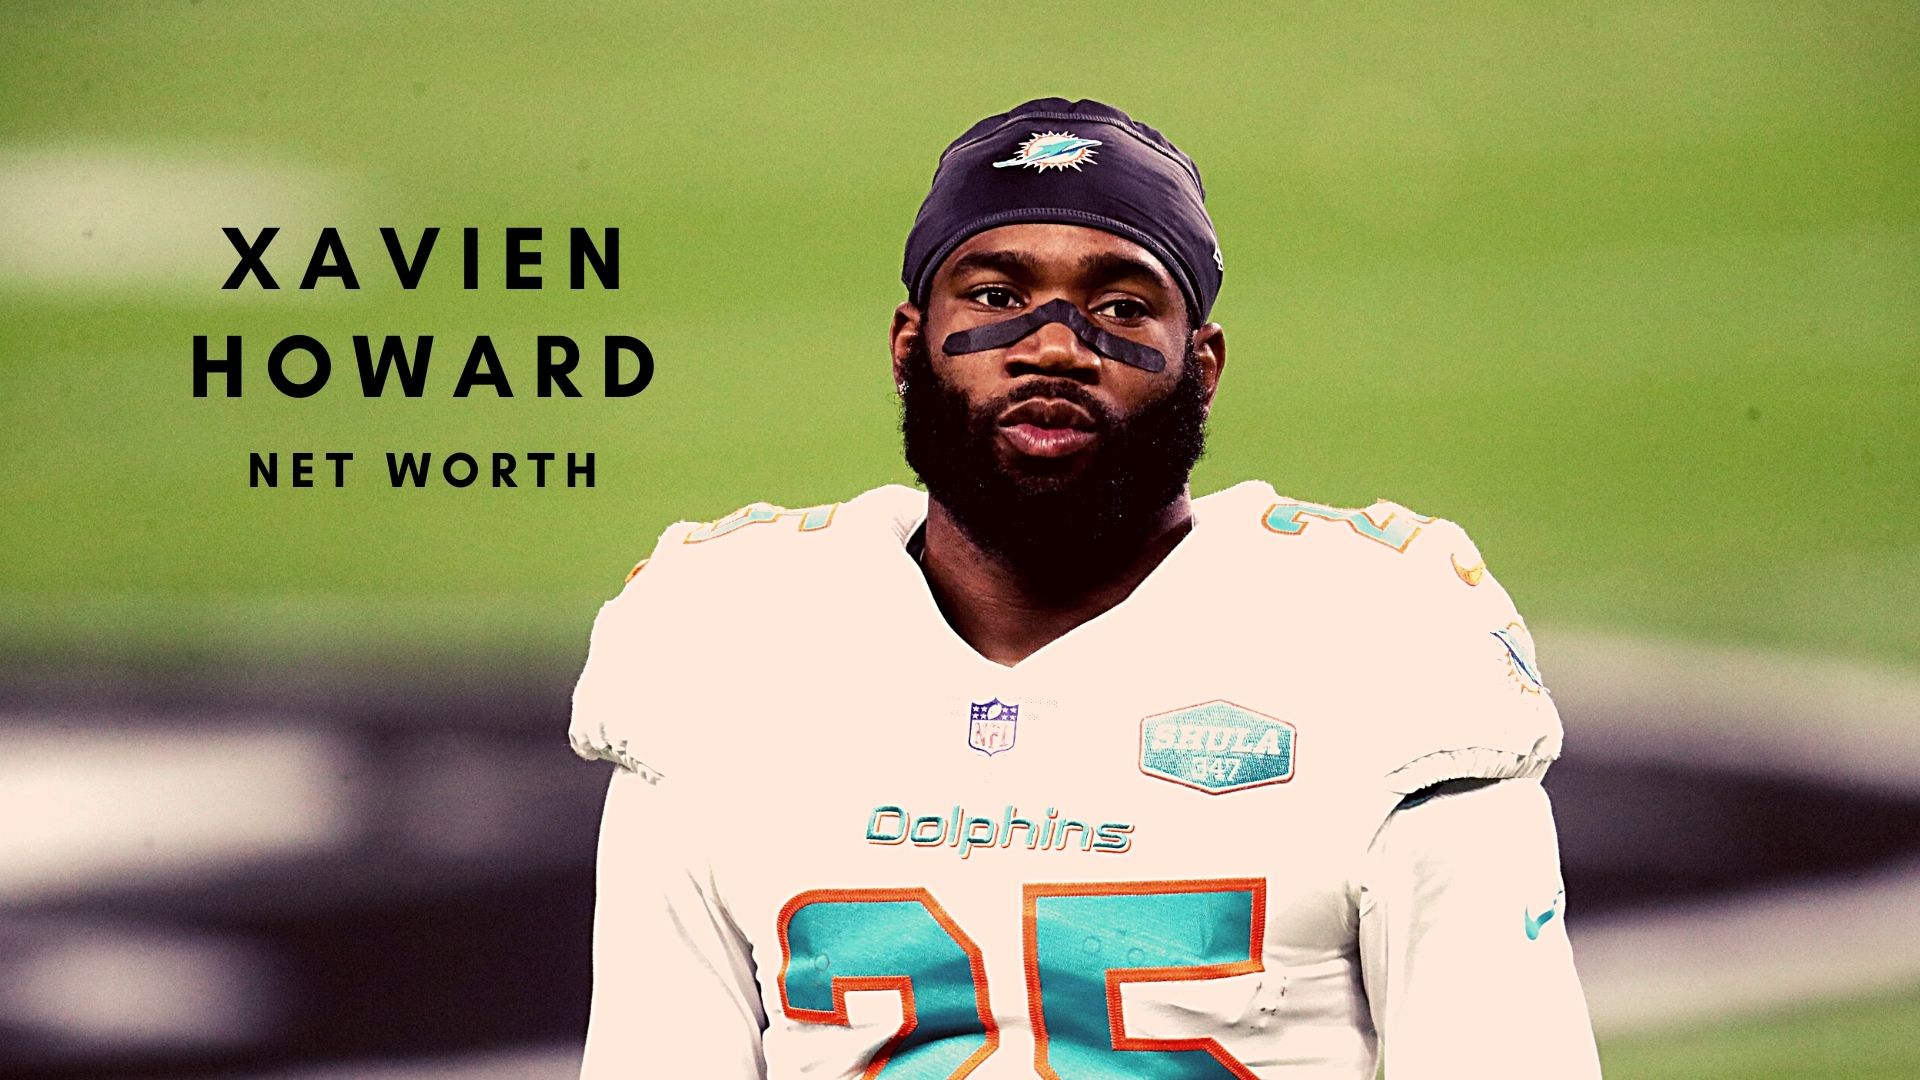 Xavien Howard 2022 Net Worth, Contract And Personal Life